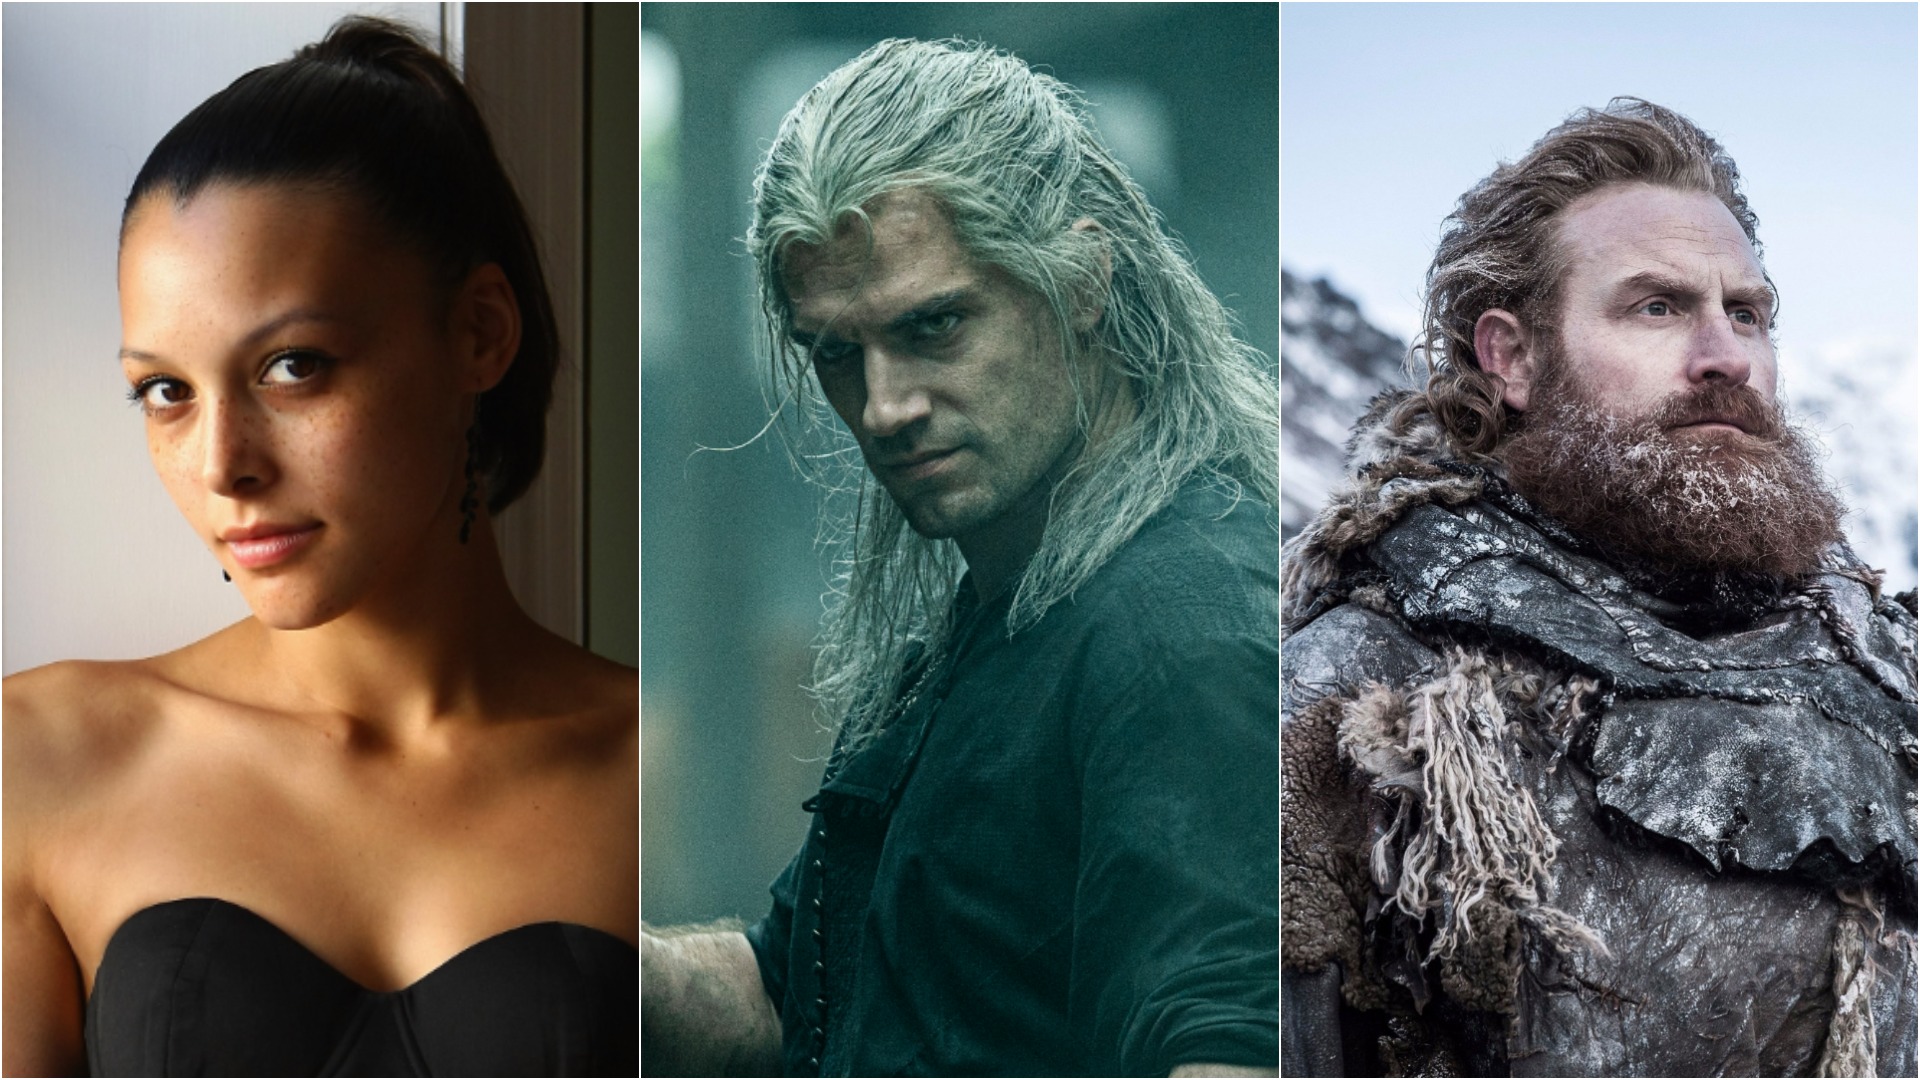 The Witcher: Who's in the cast?